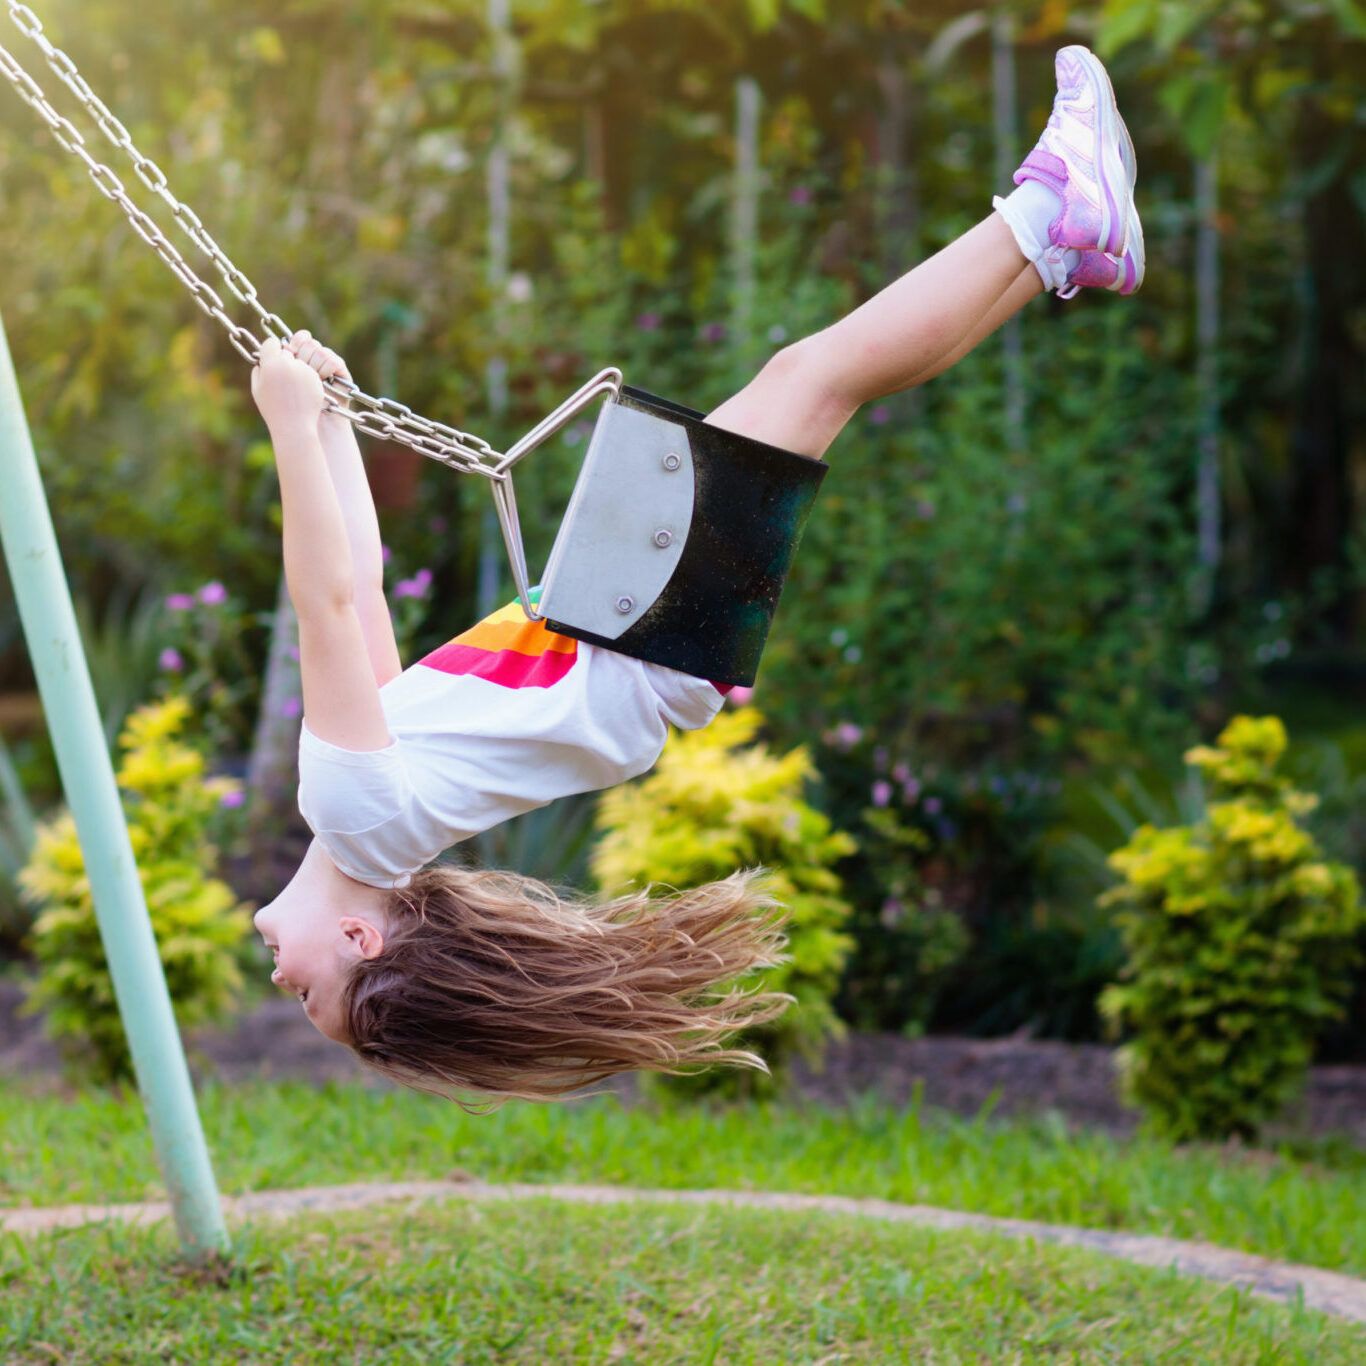 Child swinging on playground on sunny summer day in a park. Kids swing. School or kindergarten yard and play ground. Little girl flying high in the air on swing. Summer outdoor activity. Kid playing.